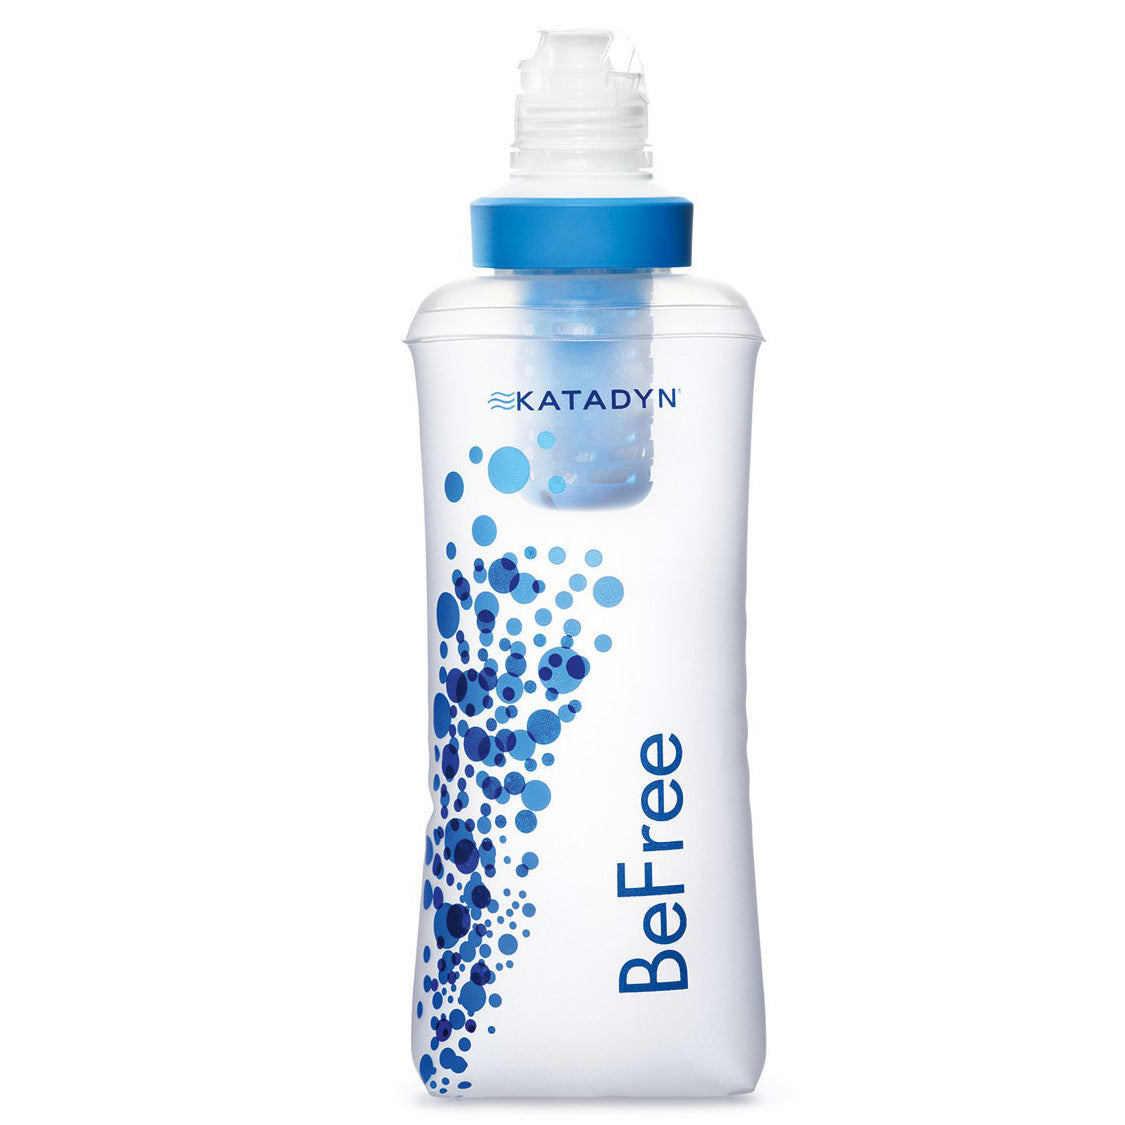 Katadyn BeFree 0.6 Litre Water Filter in clear with blue logos as seen from the front.